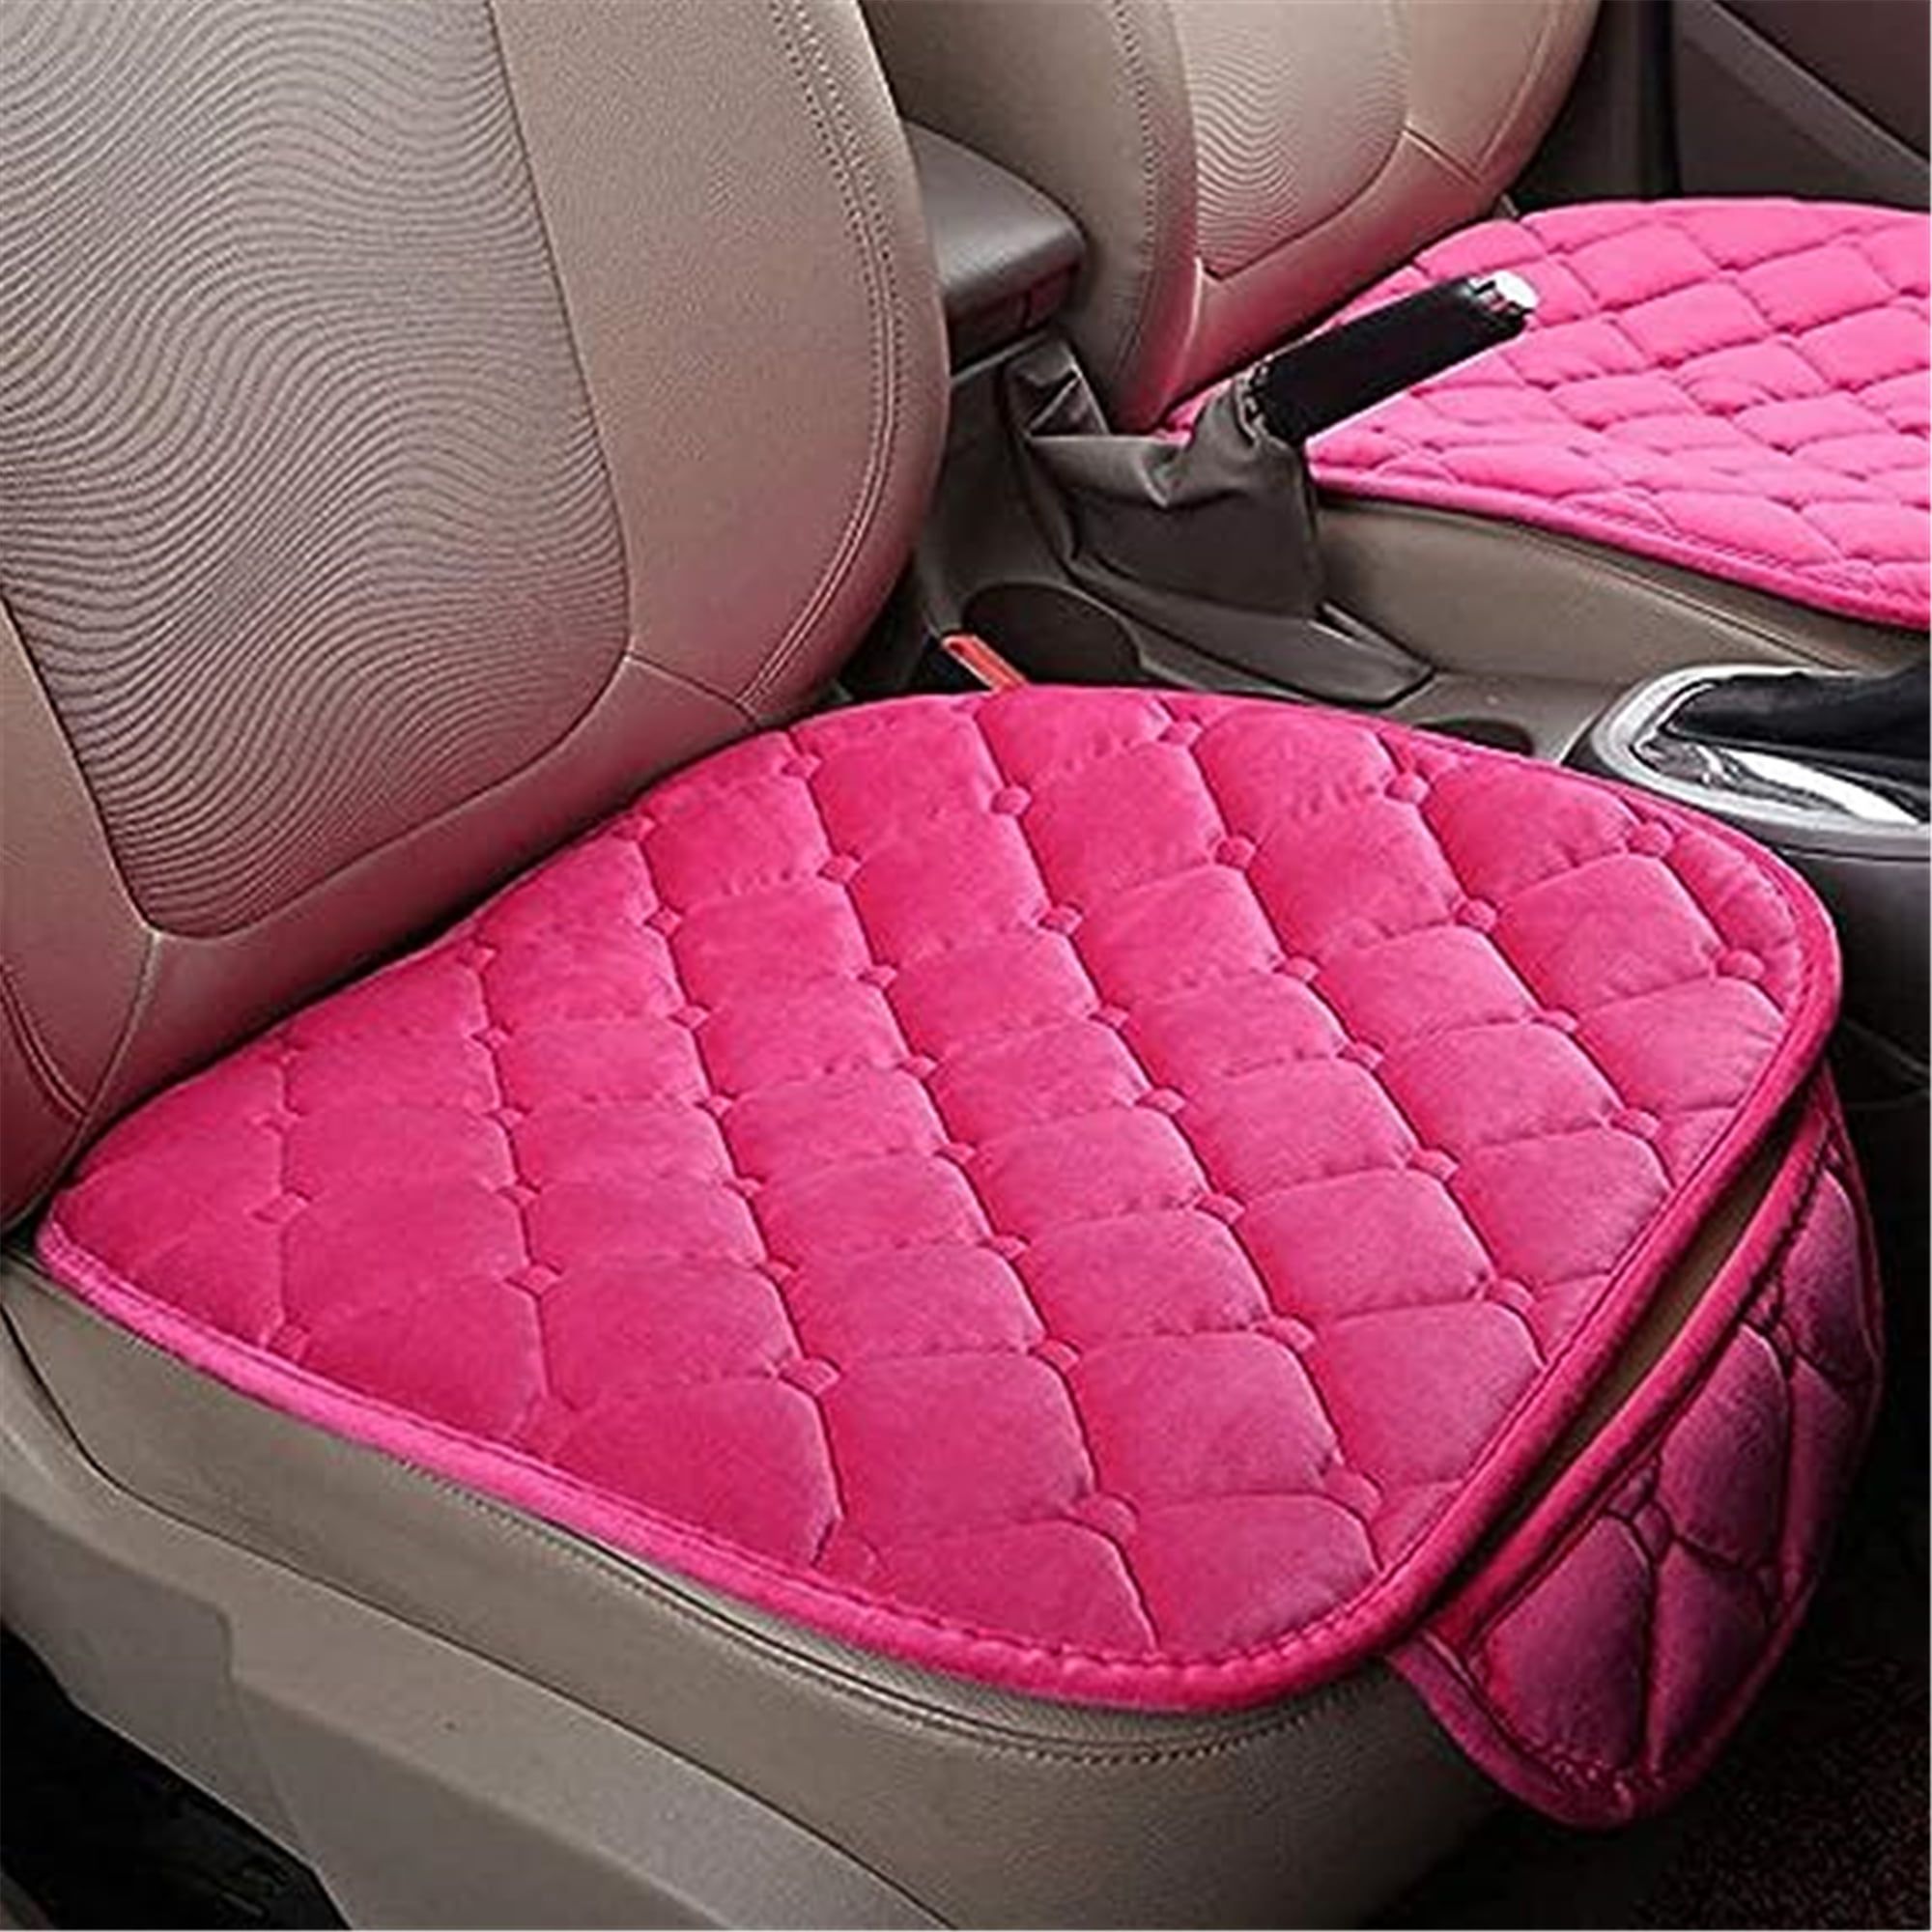 Tiitstoy 1 Pack Car Seat Cushion, Non-Slip Rubber Bottom with Storage  Pouch, Premium Comfort Memory Foam, Driver Seat Back Seat Cushion, Car Seat  Pad